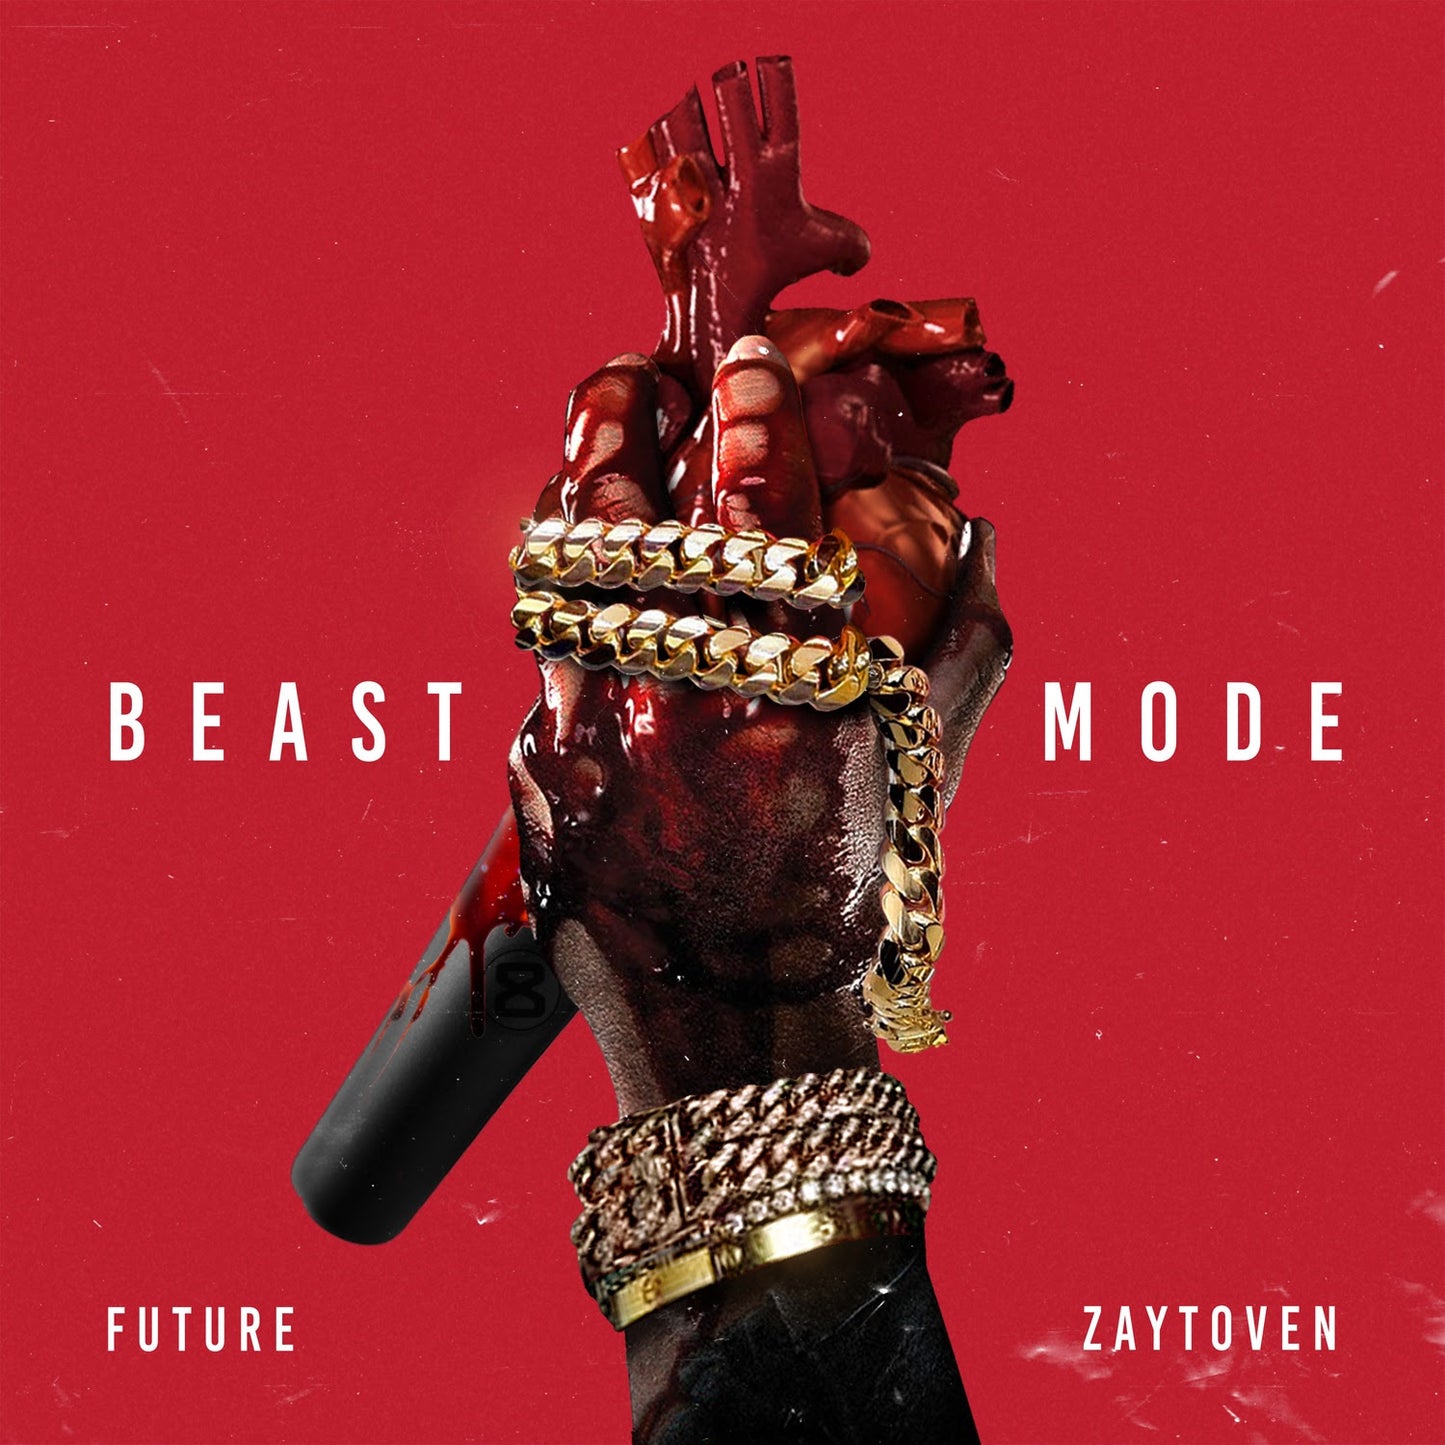 Future - Beast Mode | Buy the Vinyl LP from Flying Nun Records